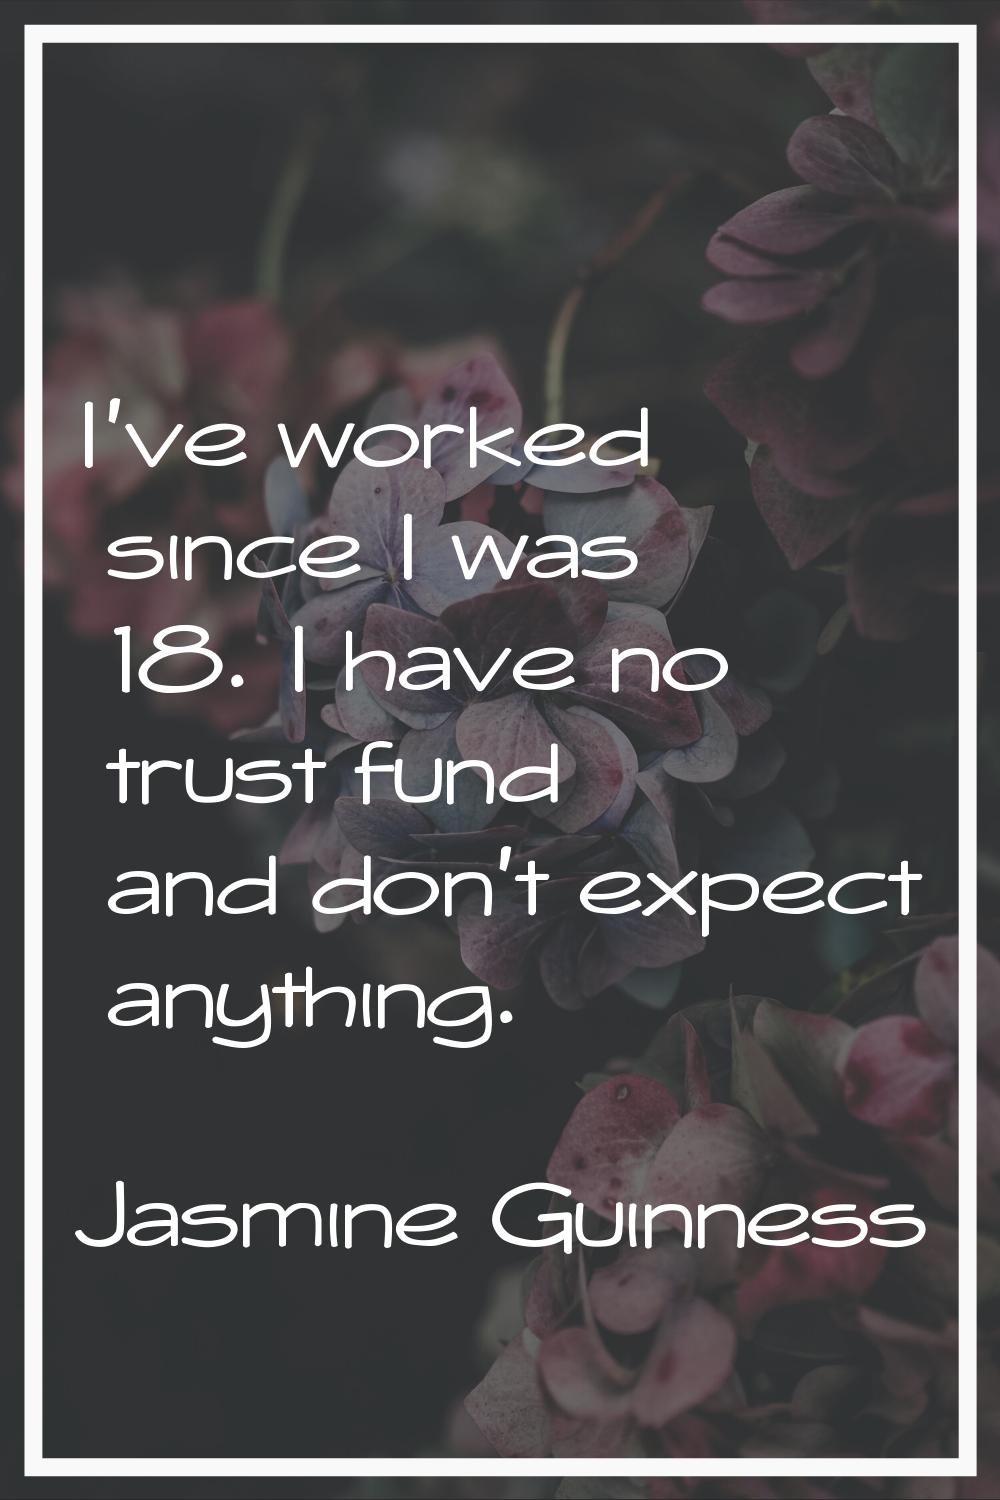 I've worked since I was 18. I have no trust fund and don't expect anything.